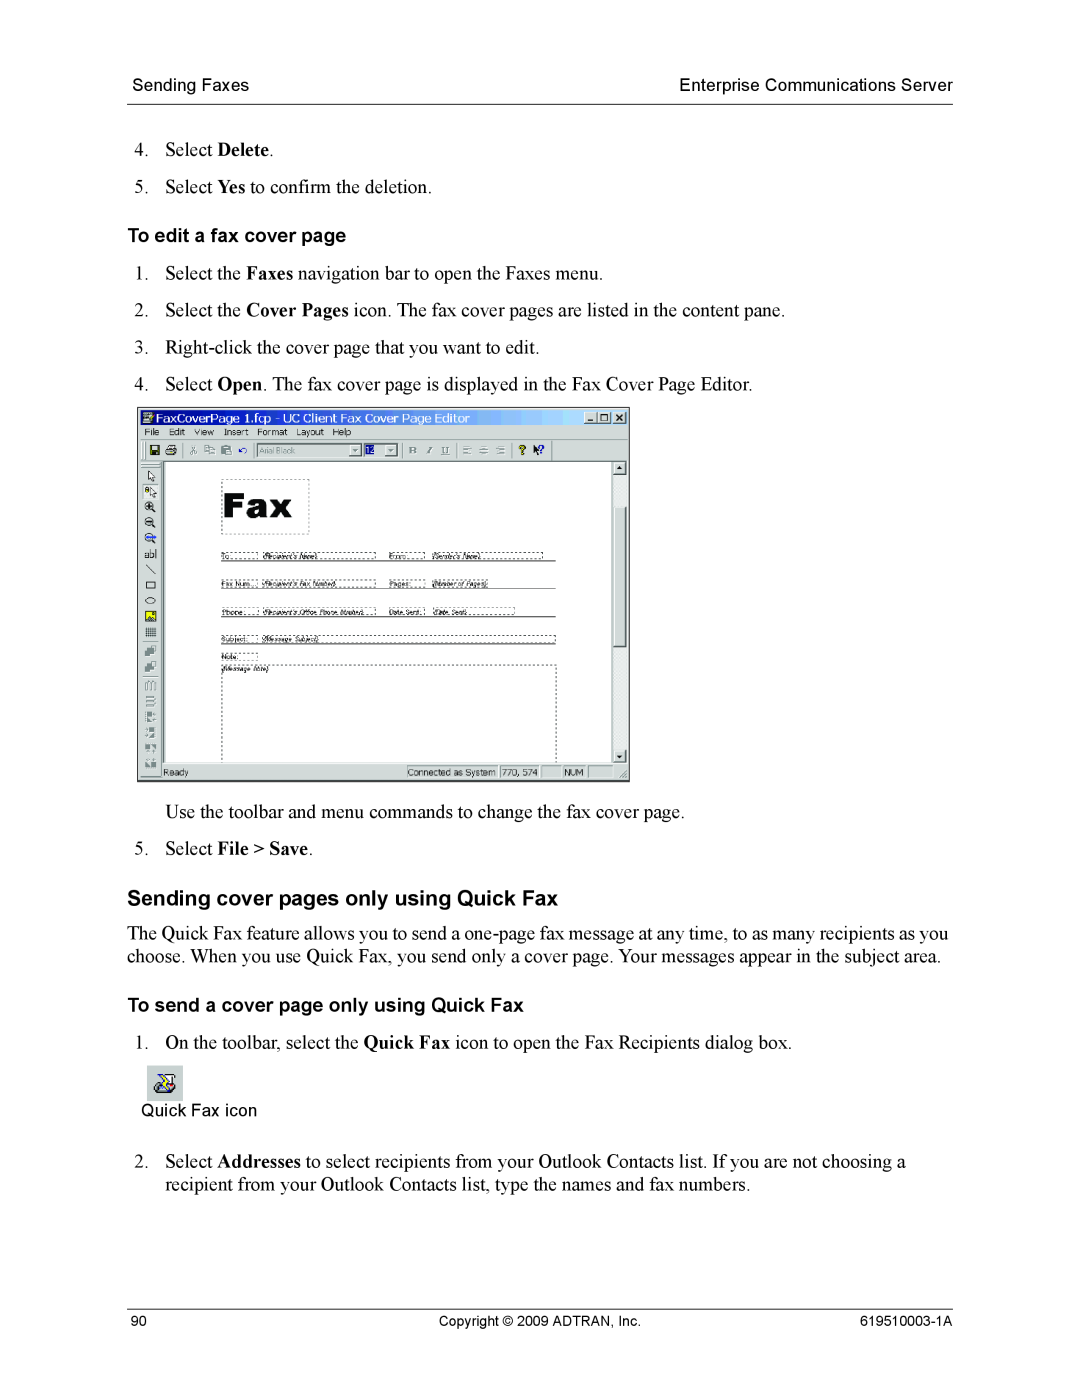 ADTRAN 619510003-1A manual Sending cover pages only using Quick Fax, To edit a fax cover page, Select File Save 